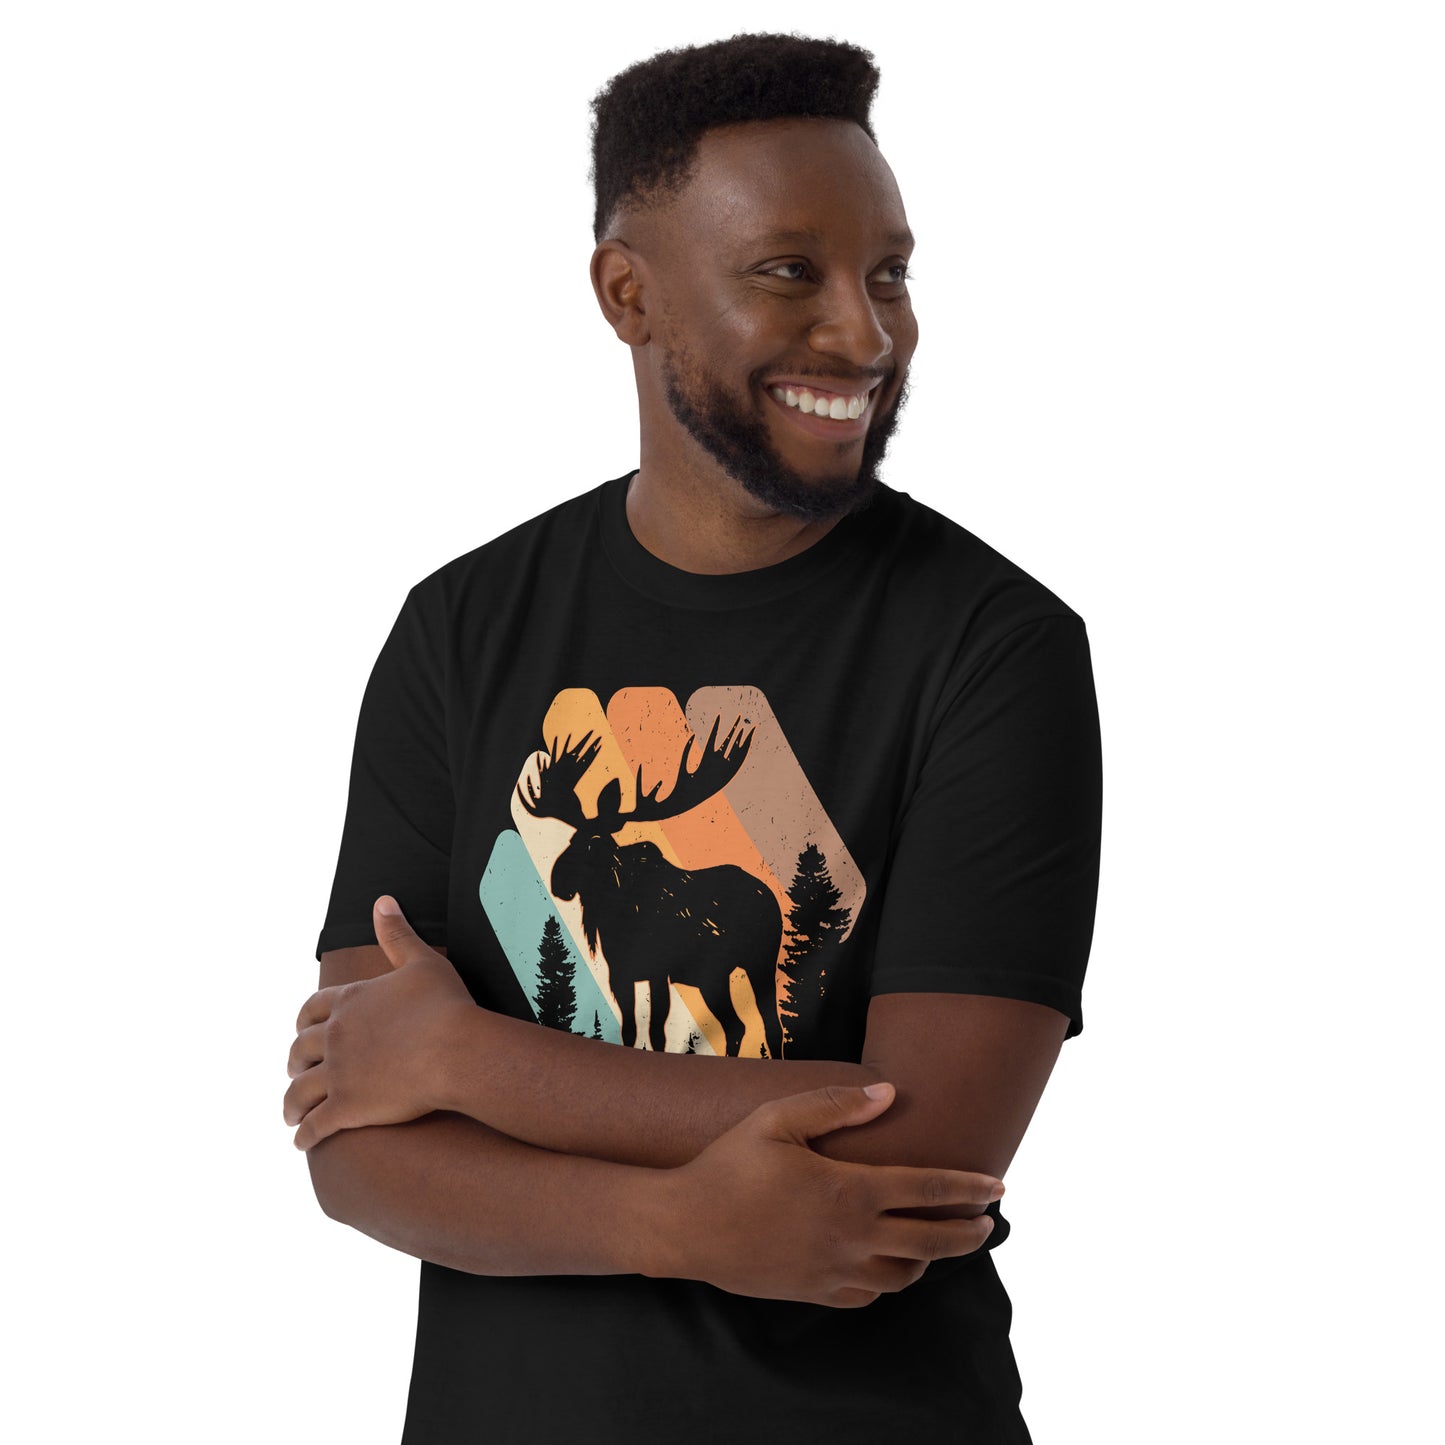 Show Your Canadian Spirit with this Vintage Moose T-Shirt